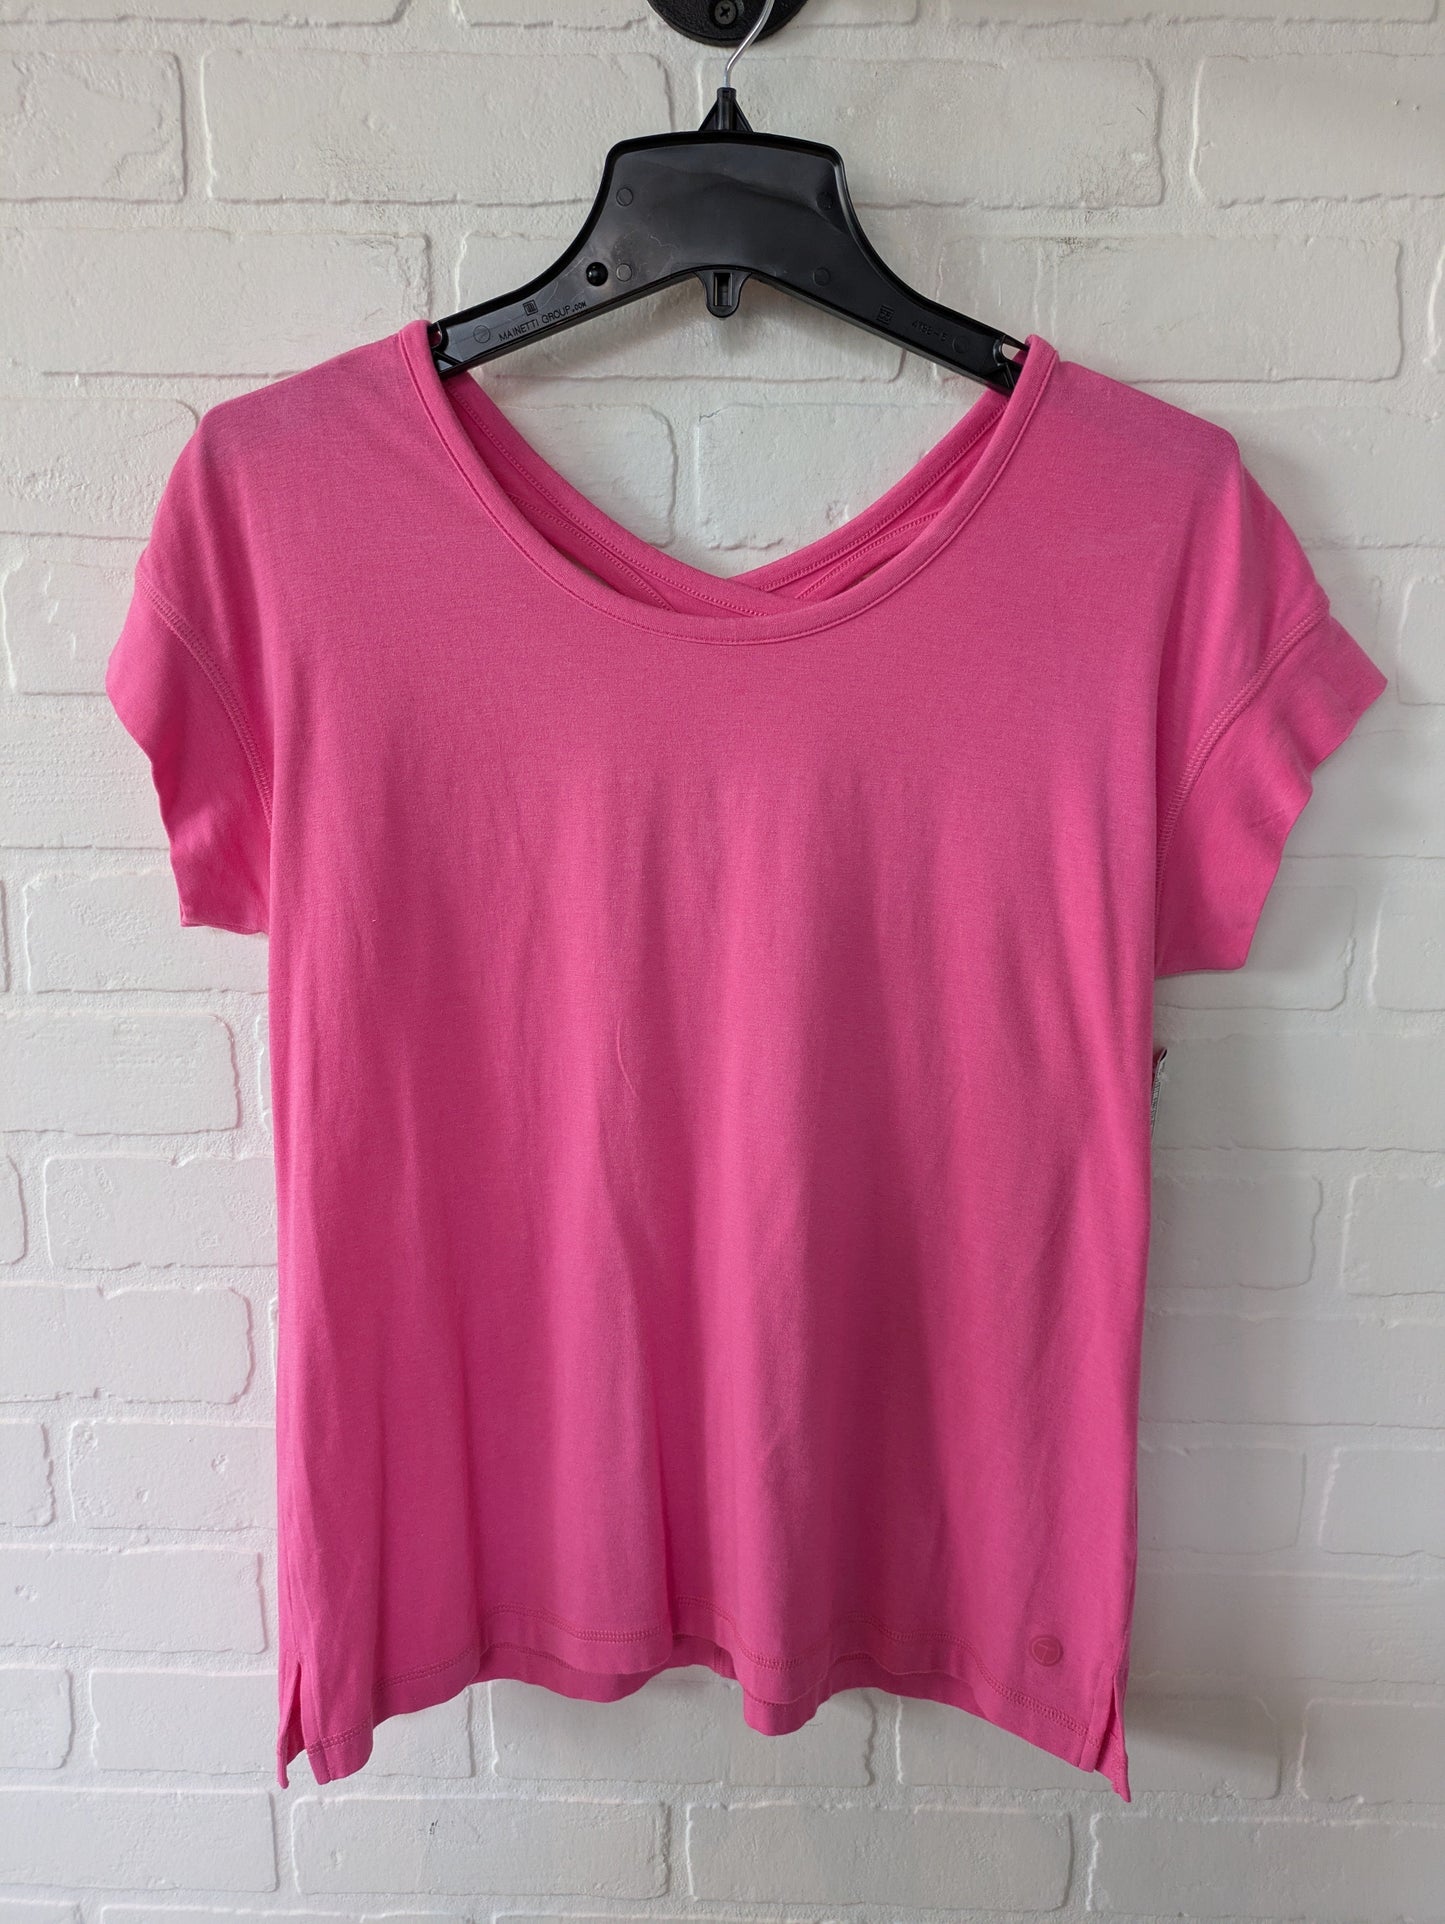 Pink Athletic Top Short Sleeve Talbots, Size M